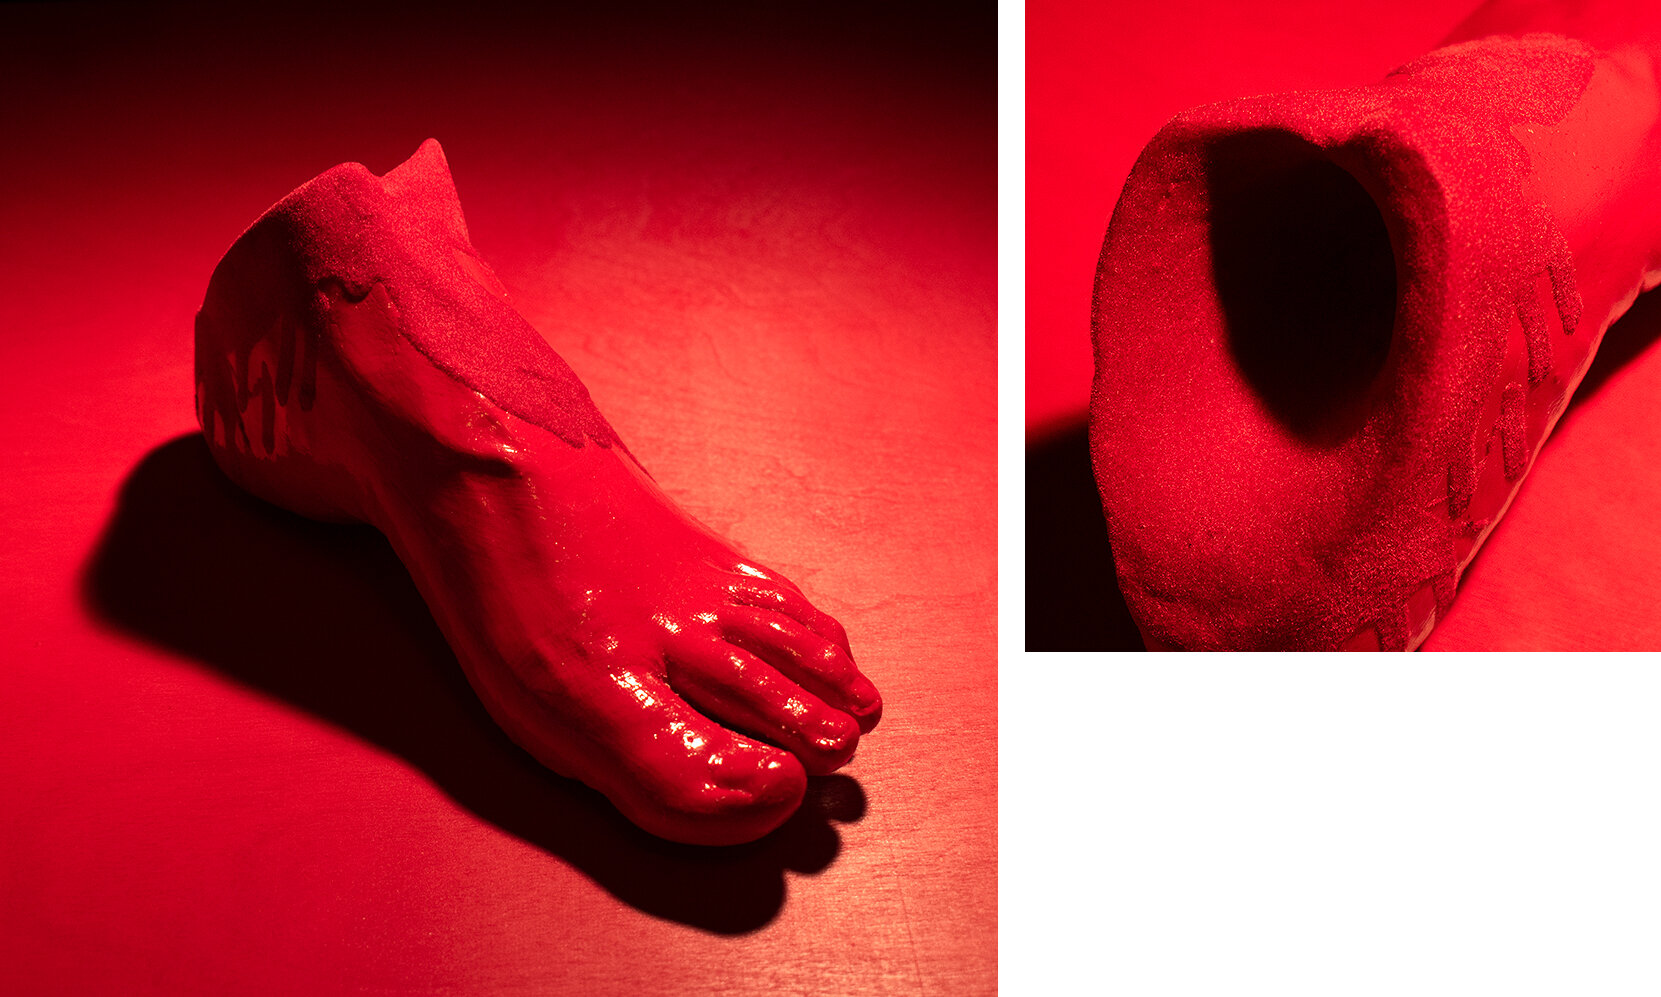   My Red Foot , 2020, Plaster, paint, flocking, size 8 women’s shoe. 